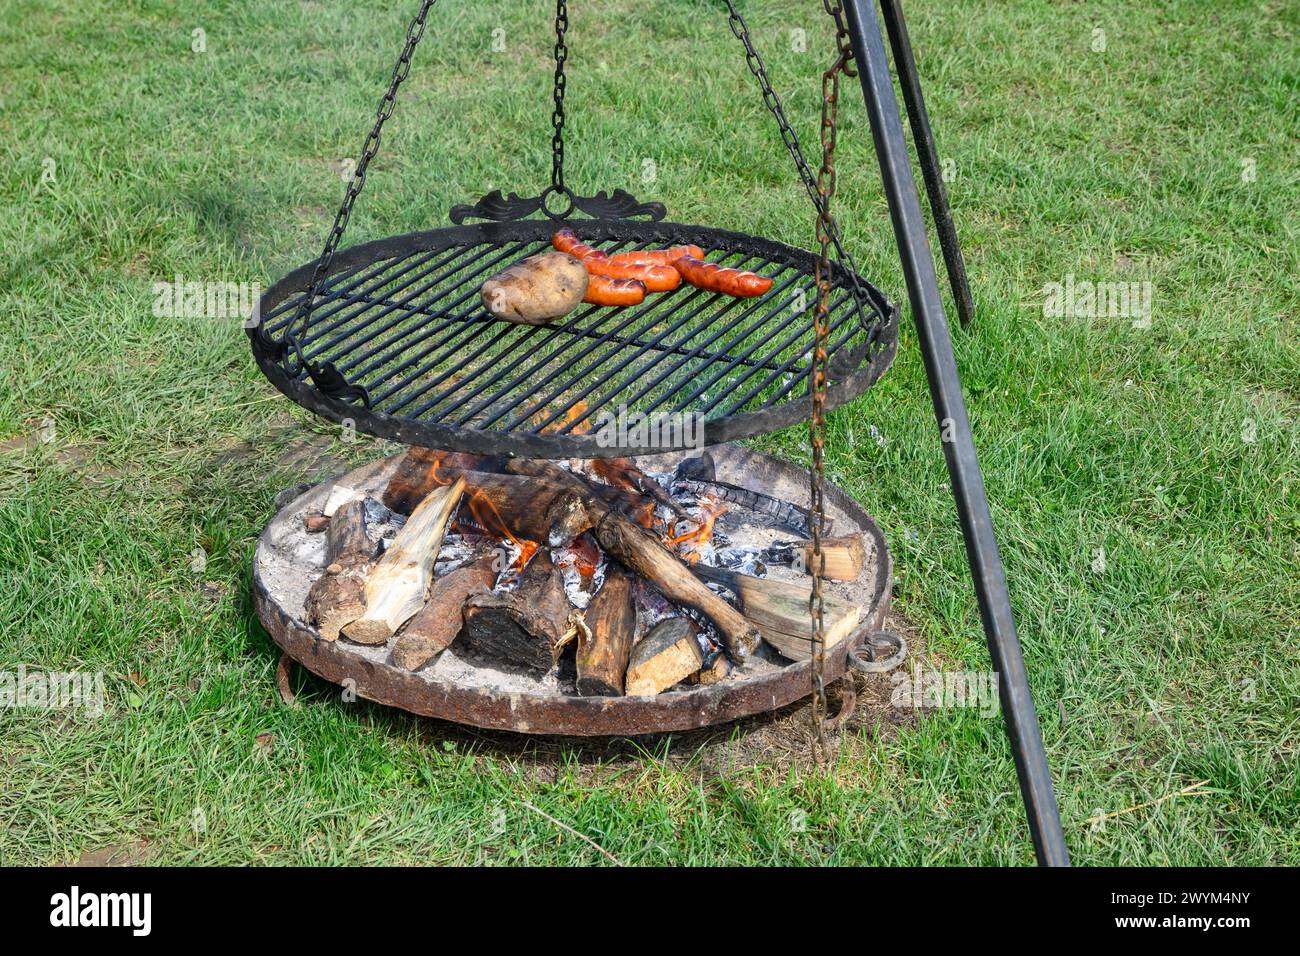 Grilling sausages and potato on barbecue grill. Barbeque grill fireplace Stock Photo